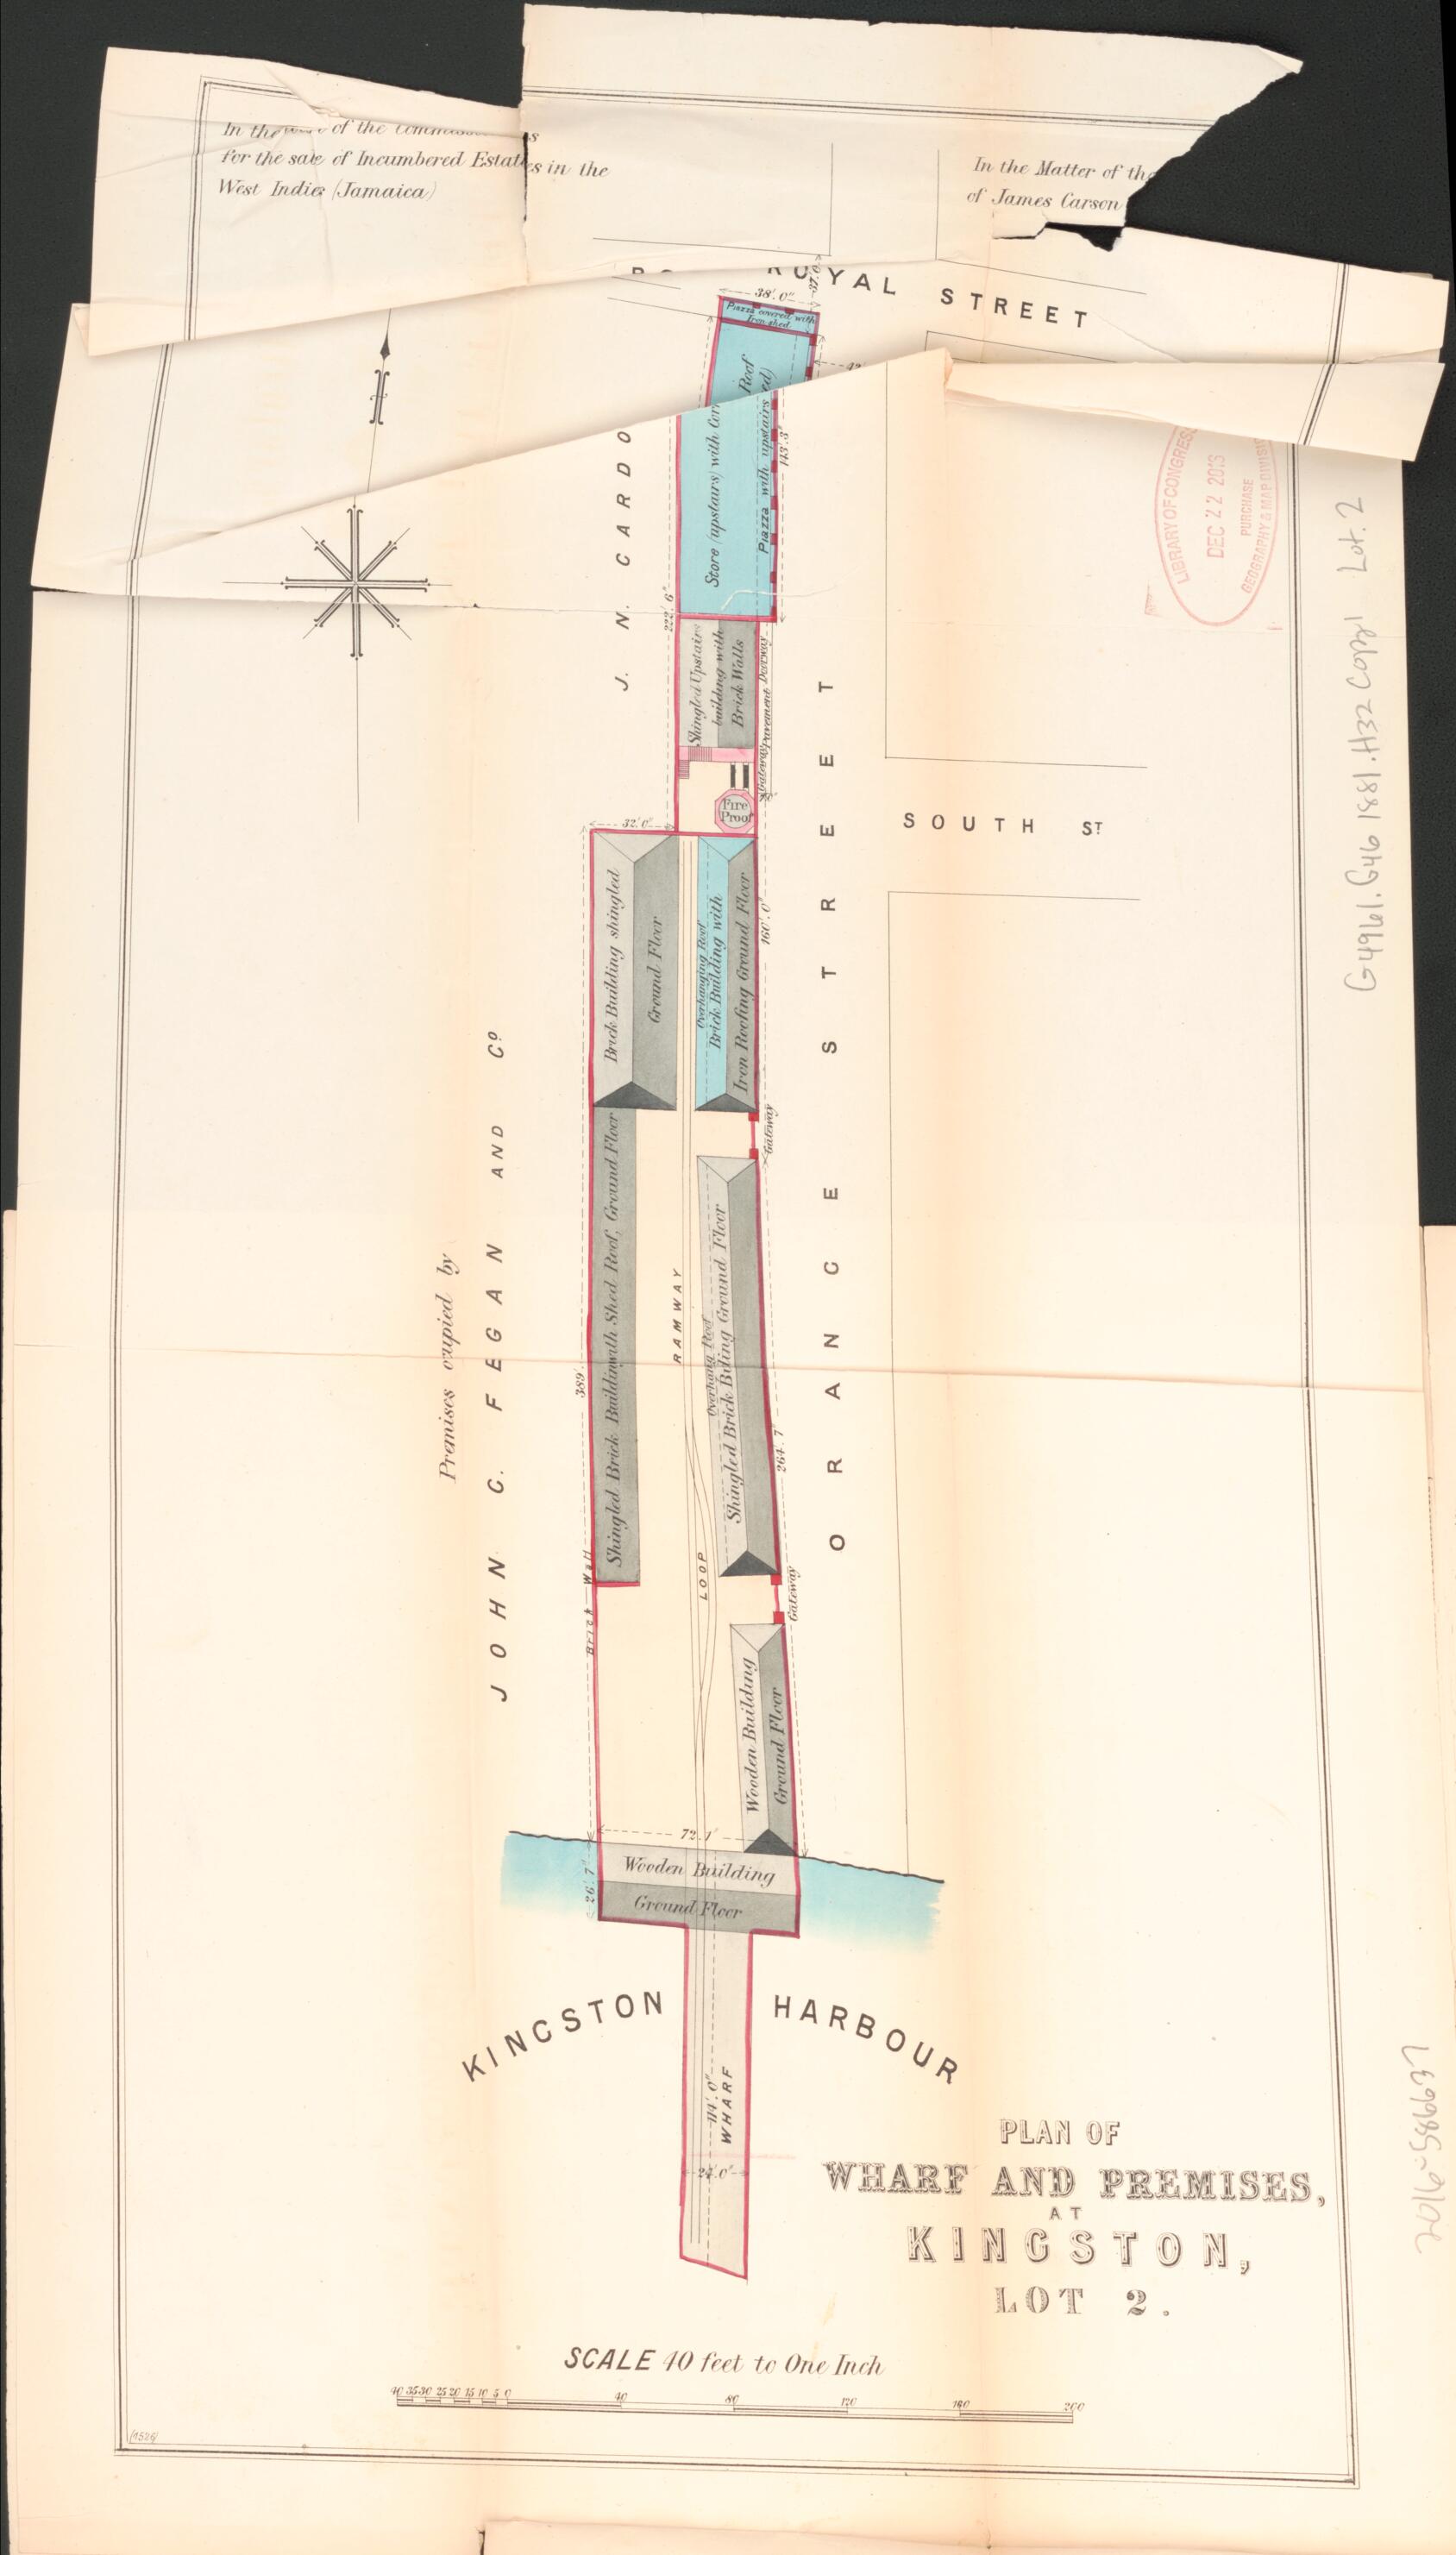 This old map of Plan of Wharf and Premises, at Kingston, Lot 2. from Encumbered Estates In the West Indies (Jamaica) from 1881 was created by Vaughan &amp; Jenkinson (Firm) Hards in 1881